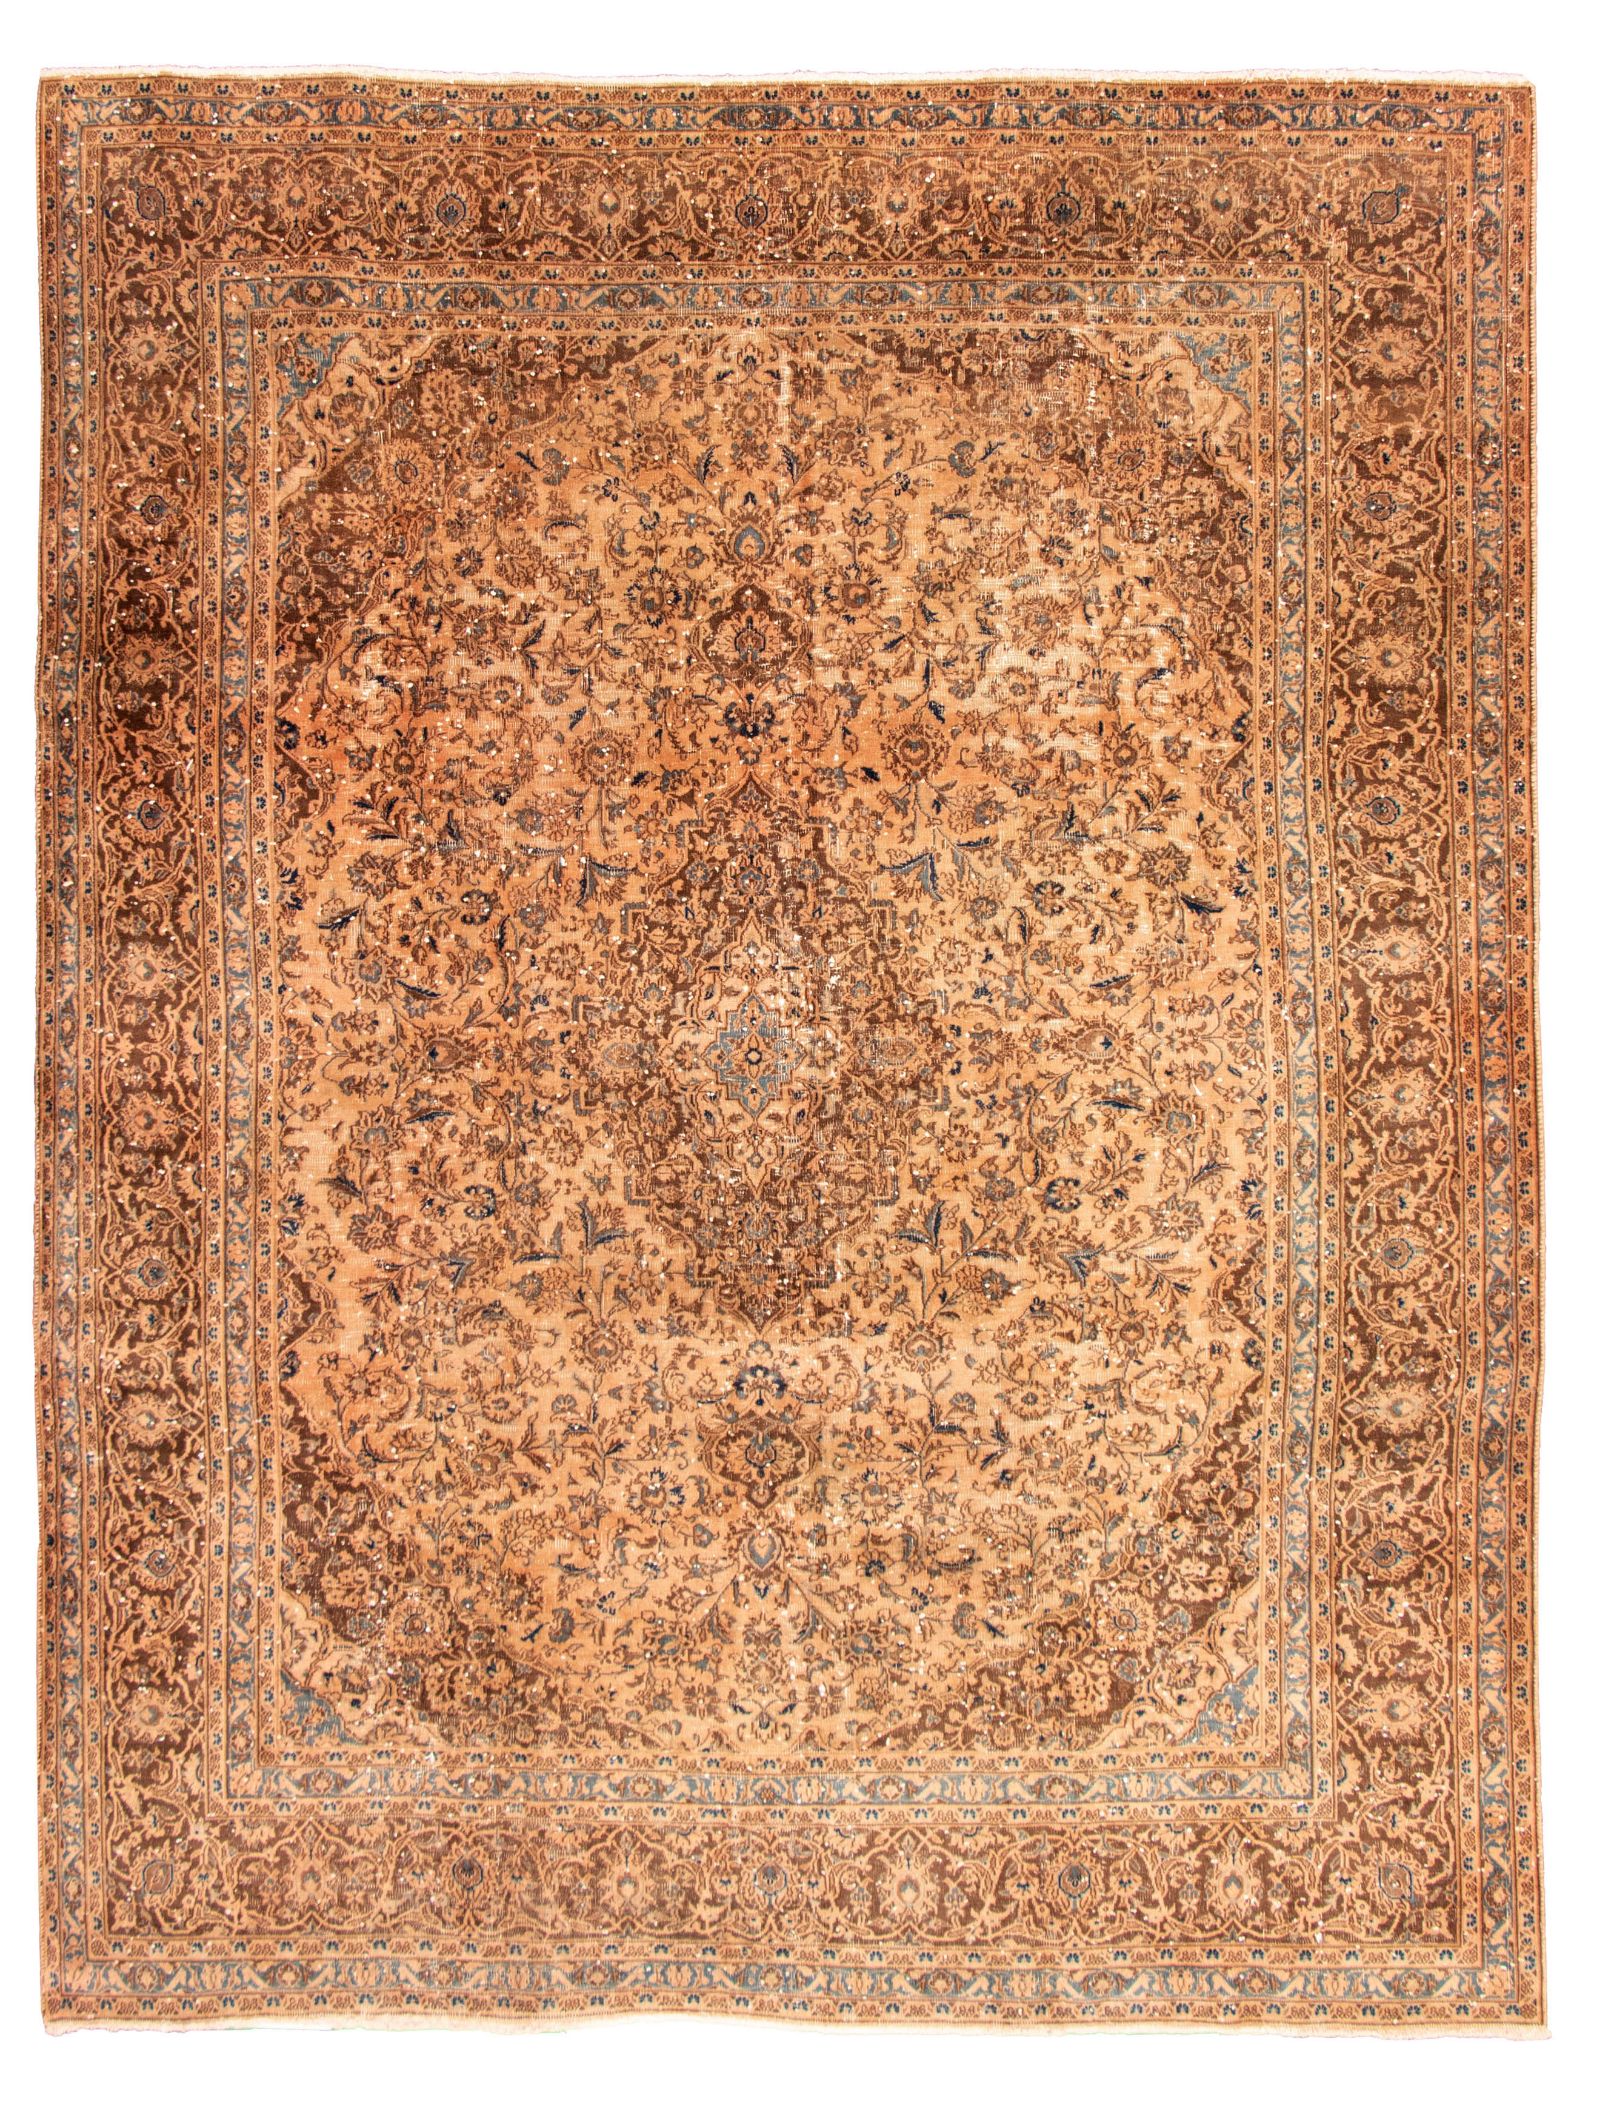 Hand-knotted Antalya Vintage Tan Wool Rug 9'10" x 12'6" Size: 9'10" x 12'6"  